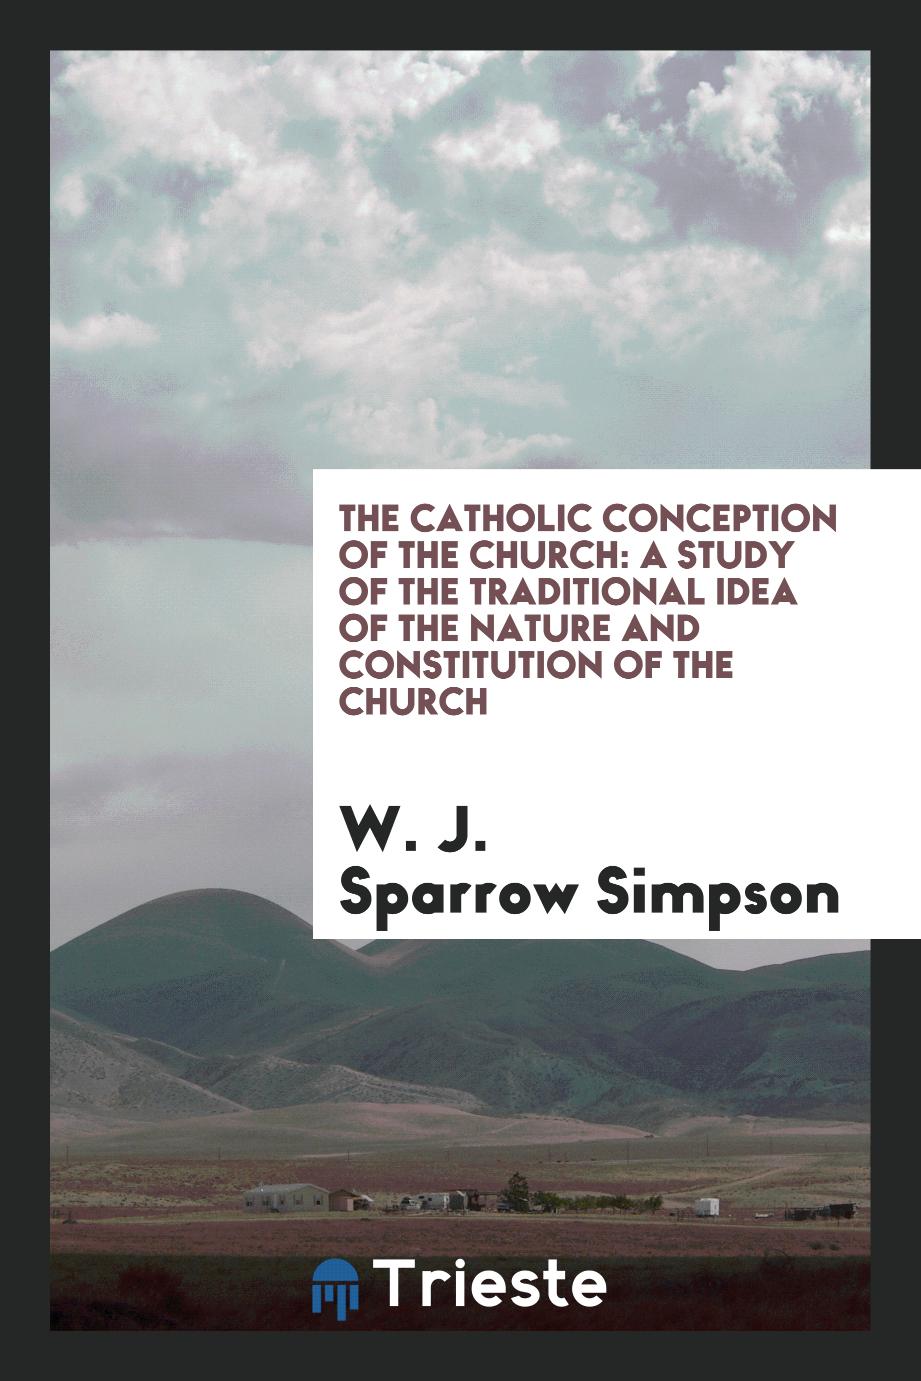 The catholic conception of the church: a study of the traditional idea of the nature and constitution of the church